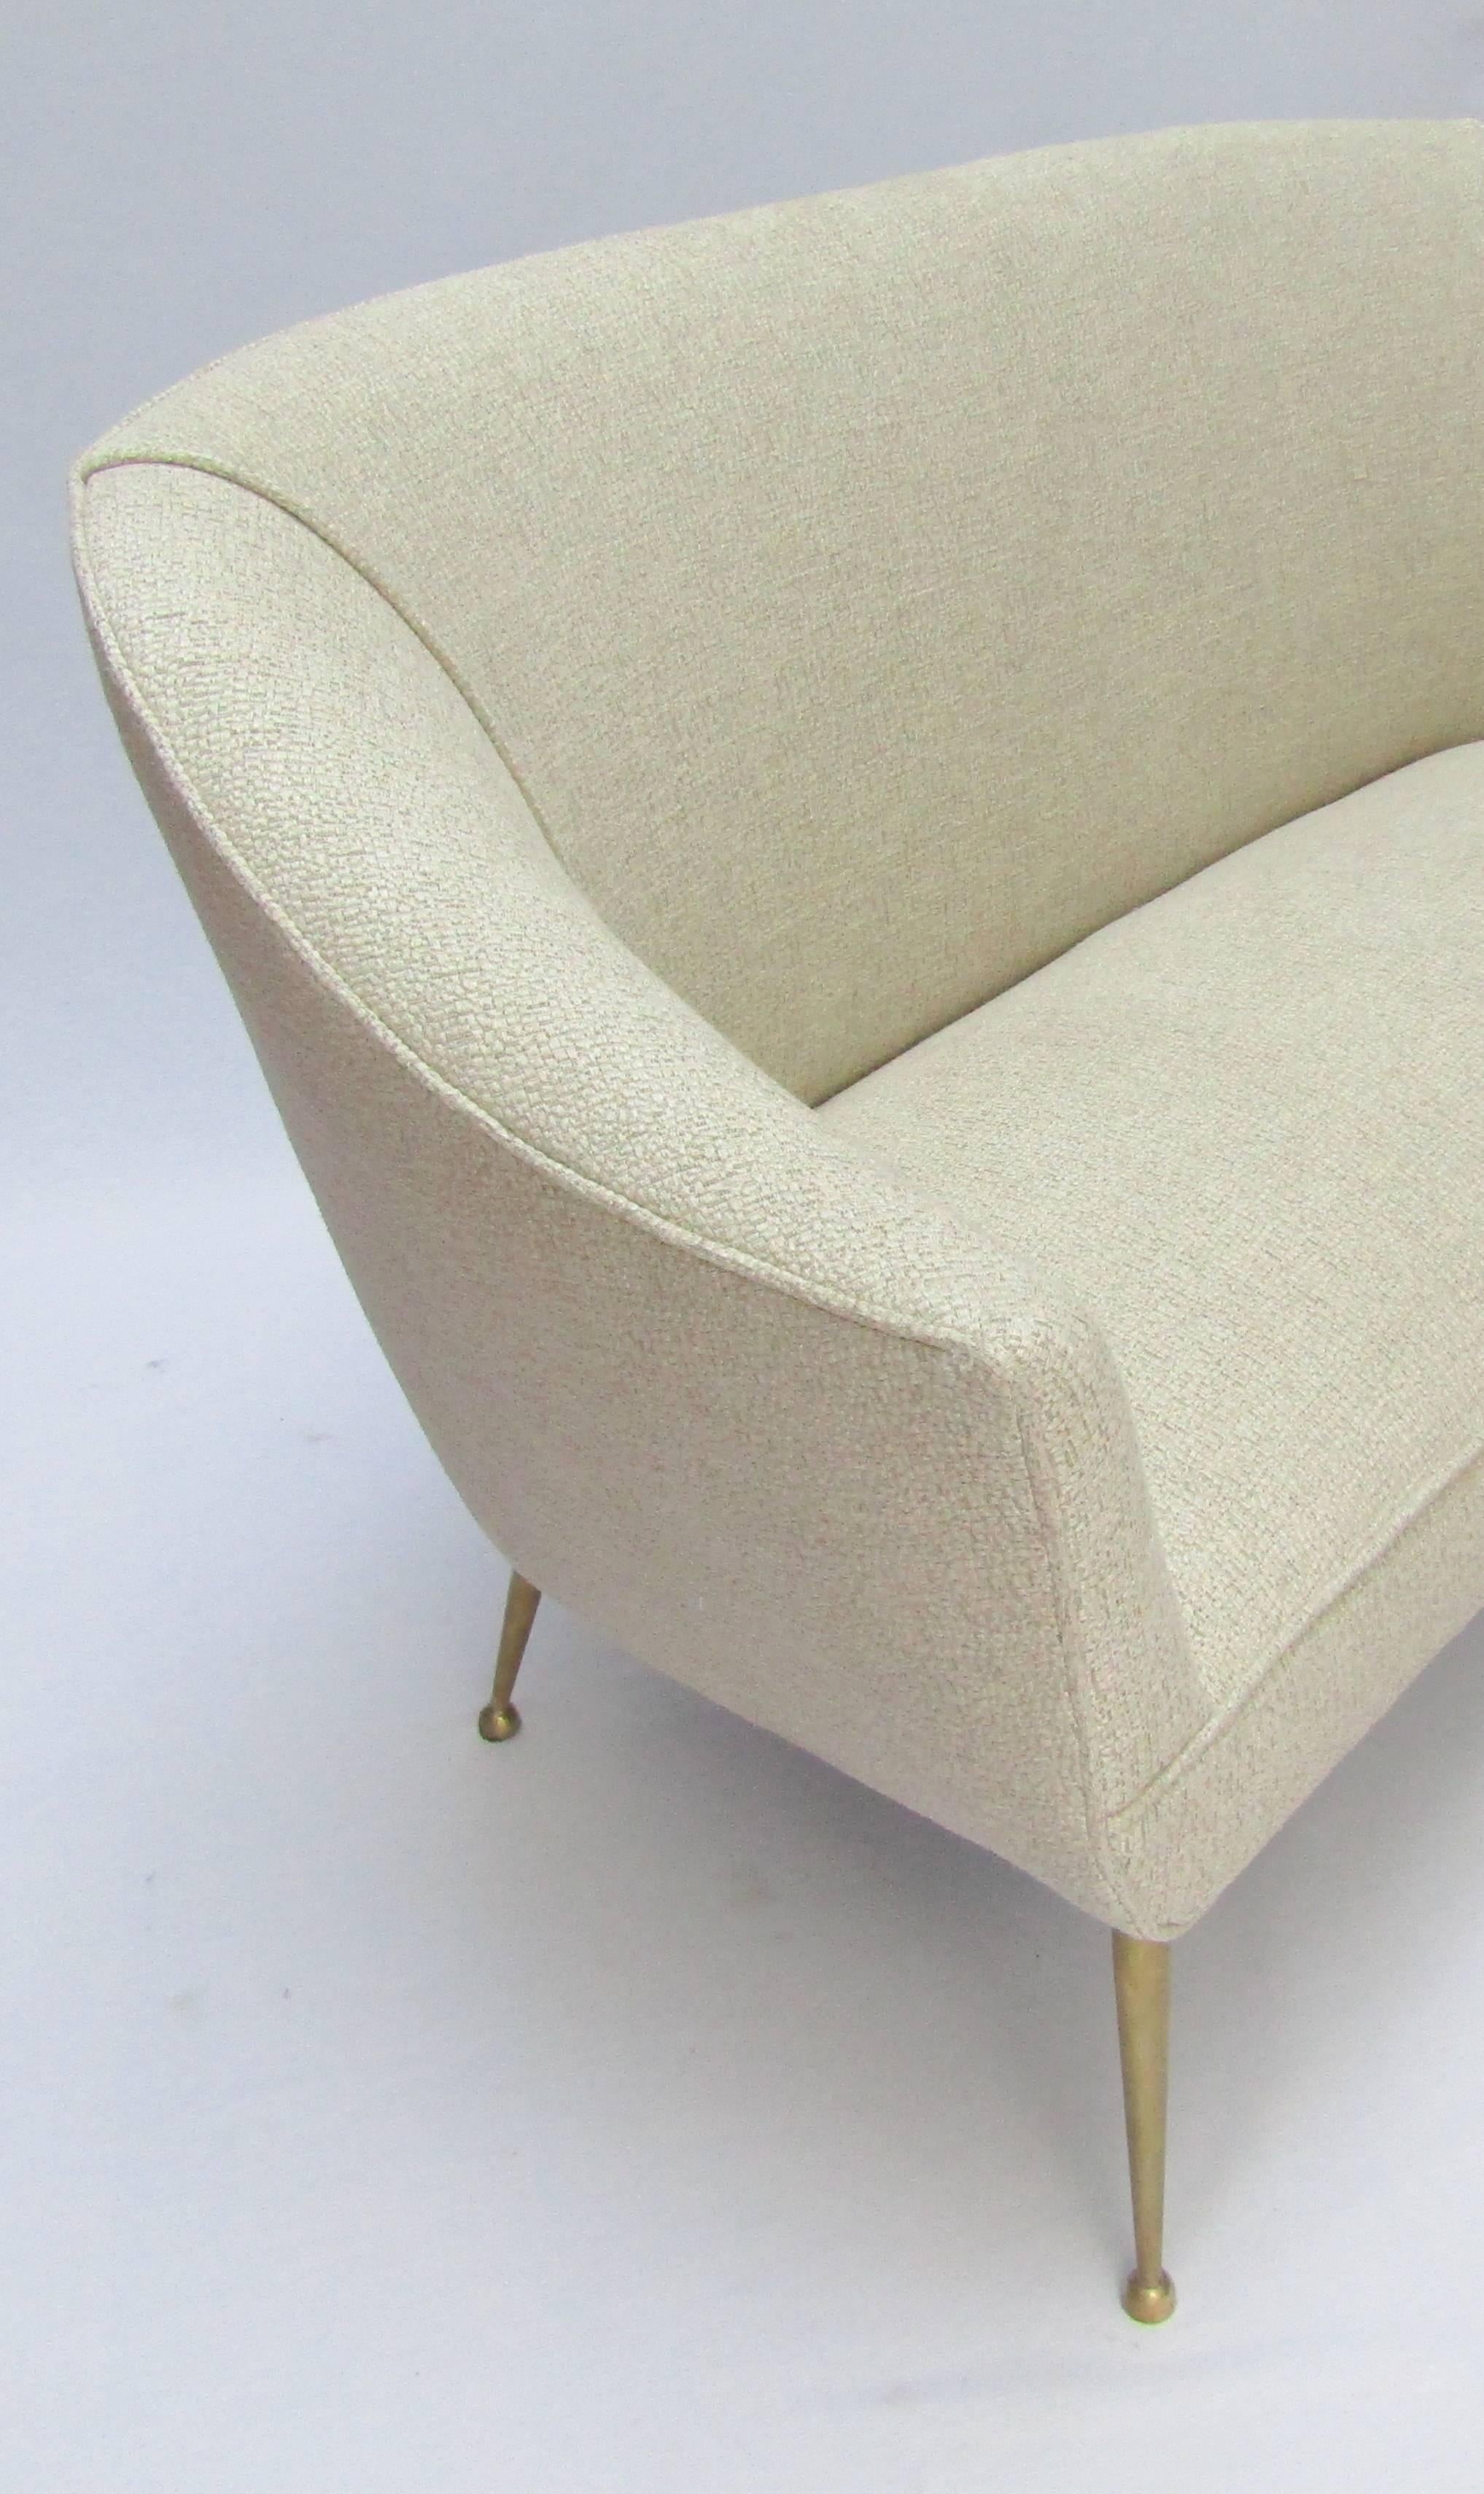 A two-seat sofa with brass legs
upholstered in Osborne & Little Antibes fabric (color 06)
(cushions sold separately)